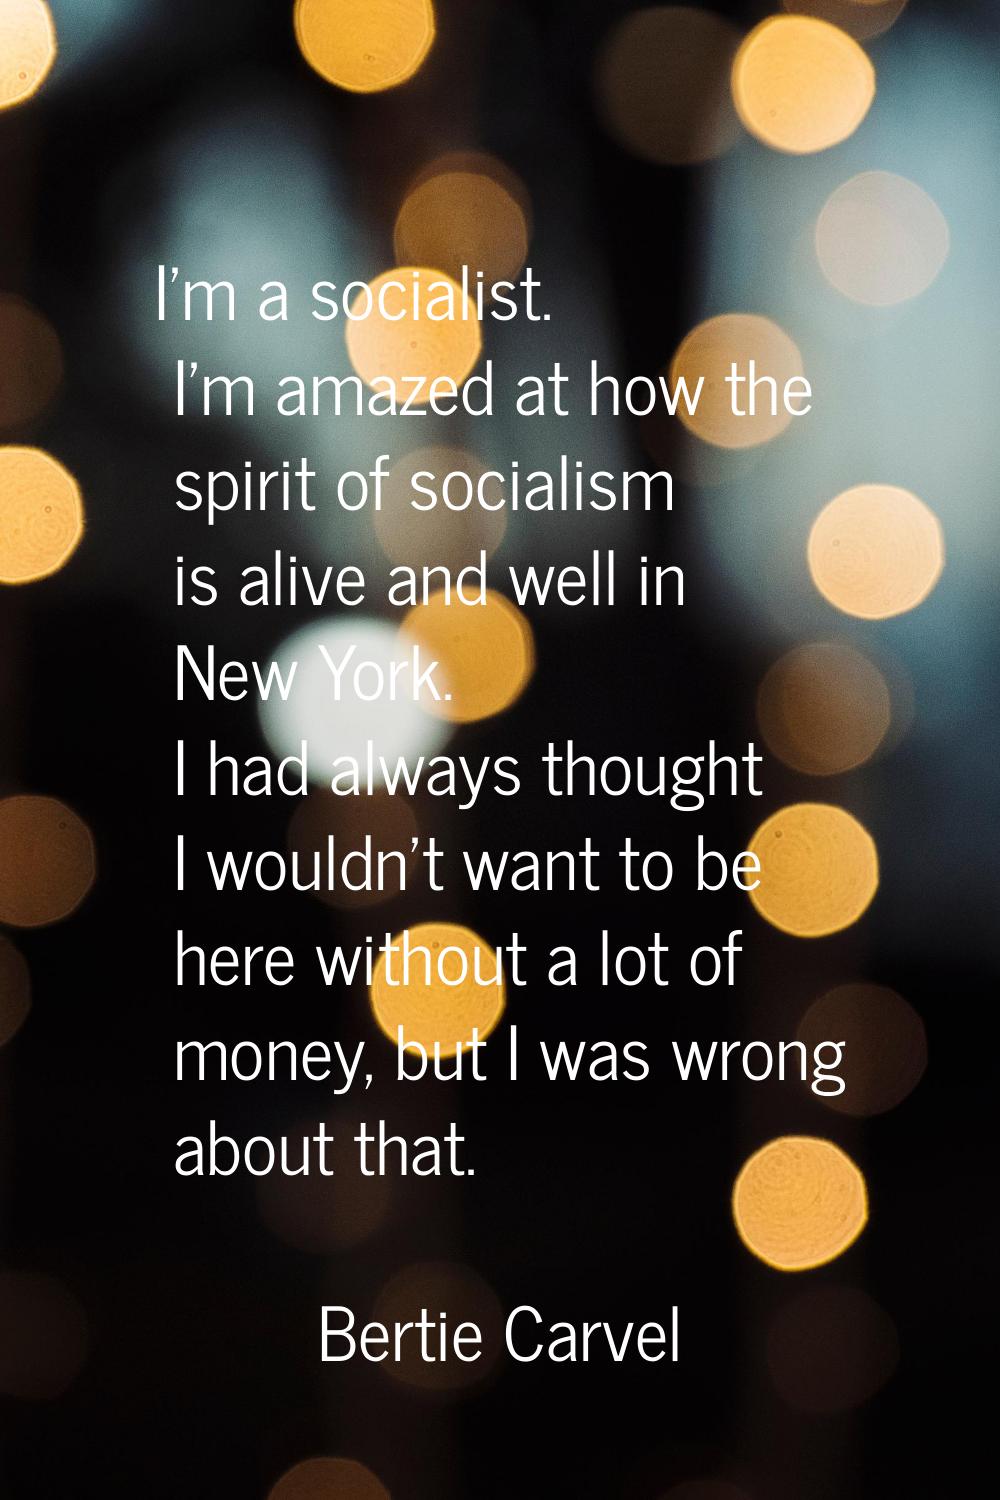 I'm a socialist. I'm amazed at how the spirit of socialism is alive and well in New York. I had alw